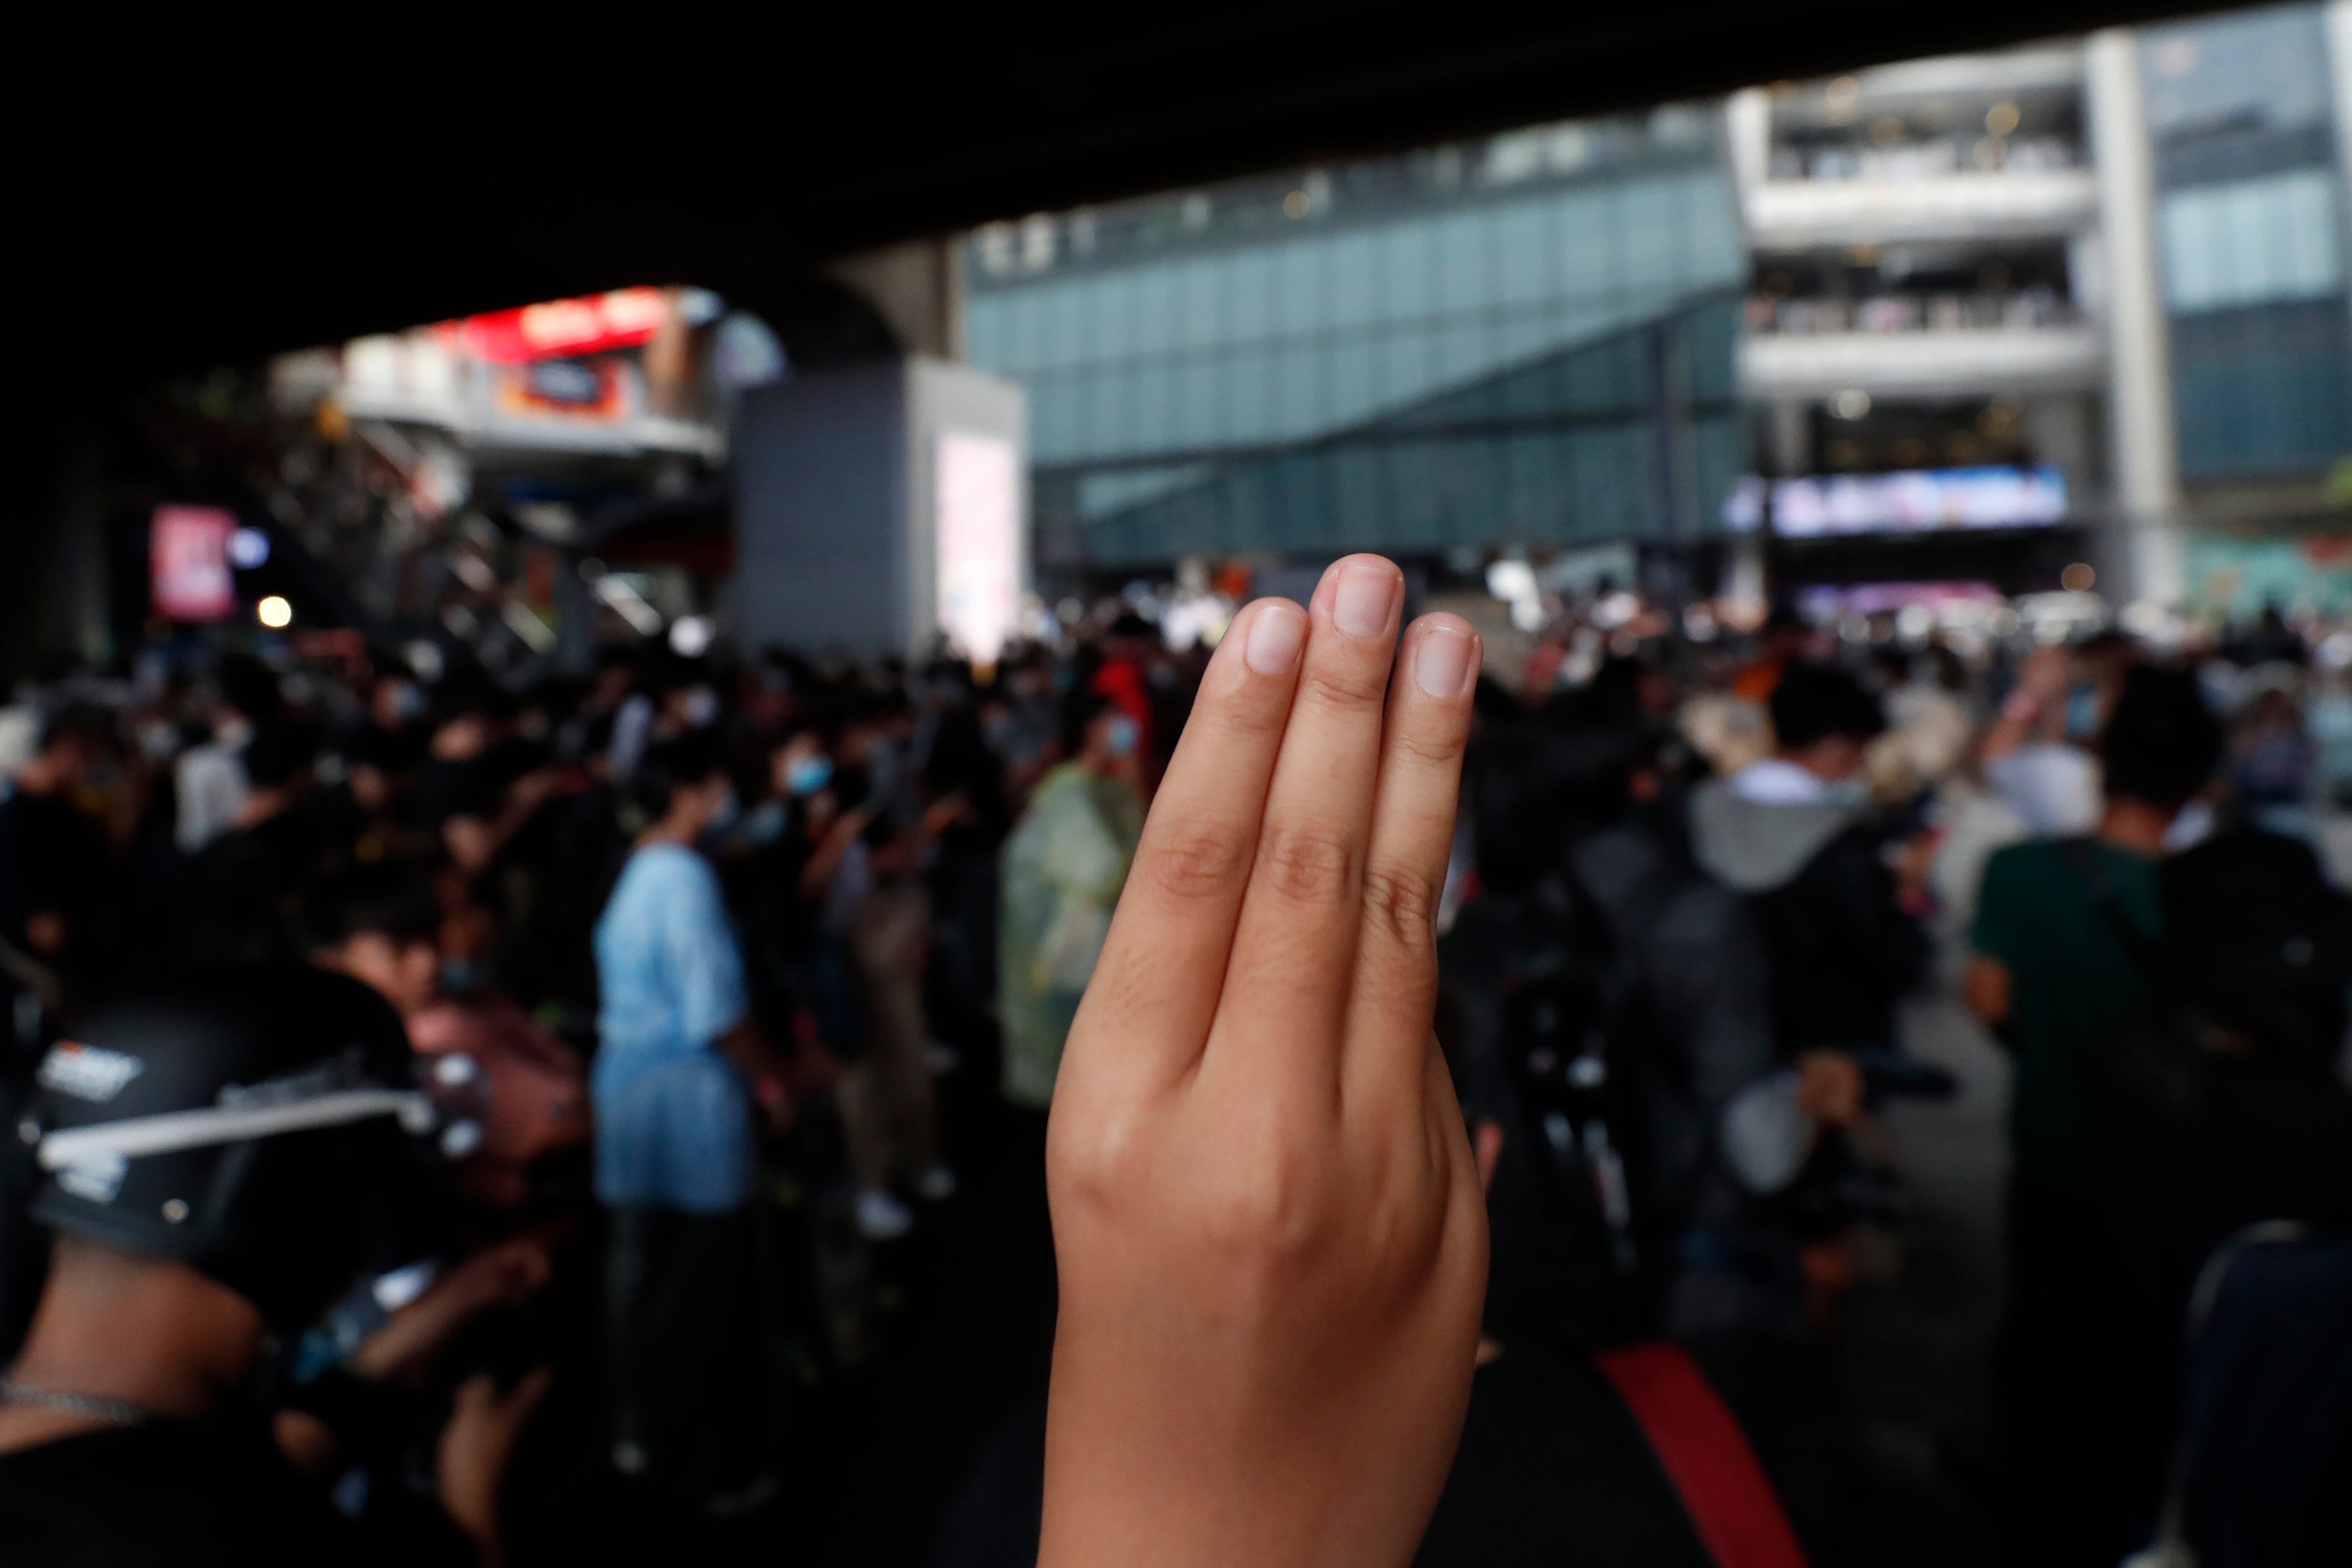 The popular three-finger protest gesture during a student rally in Bangkok on 21 November